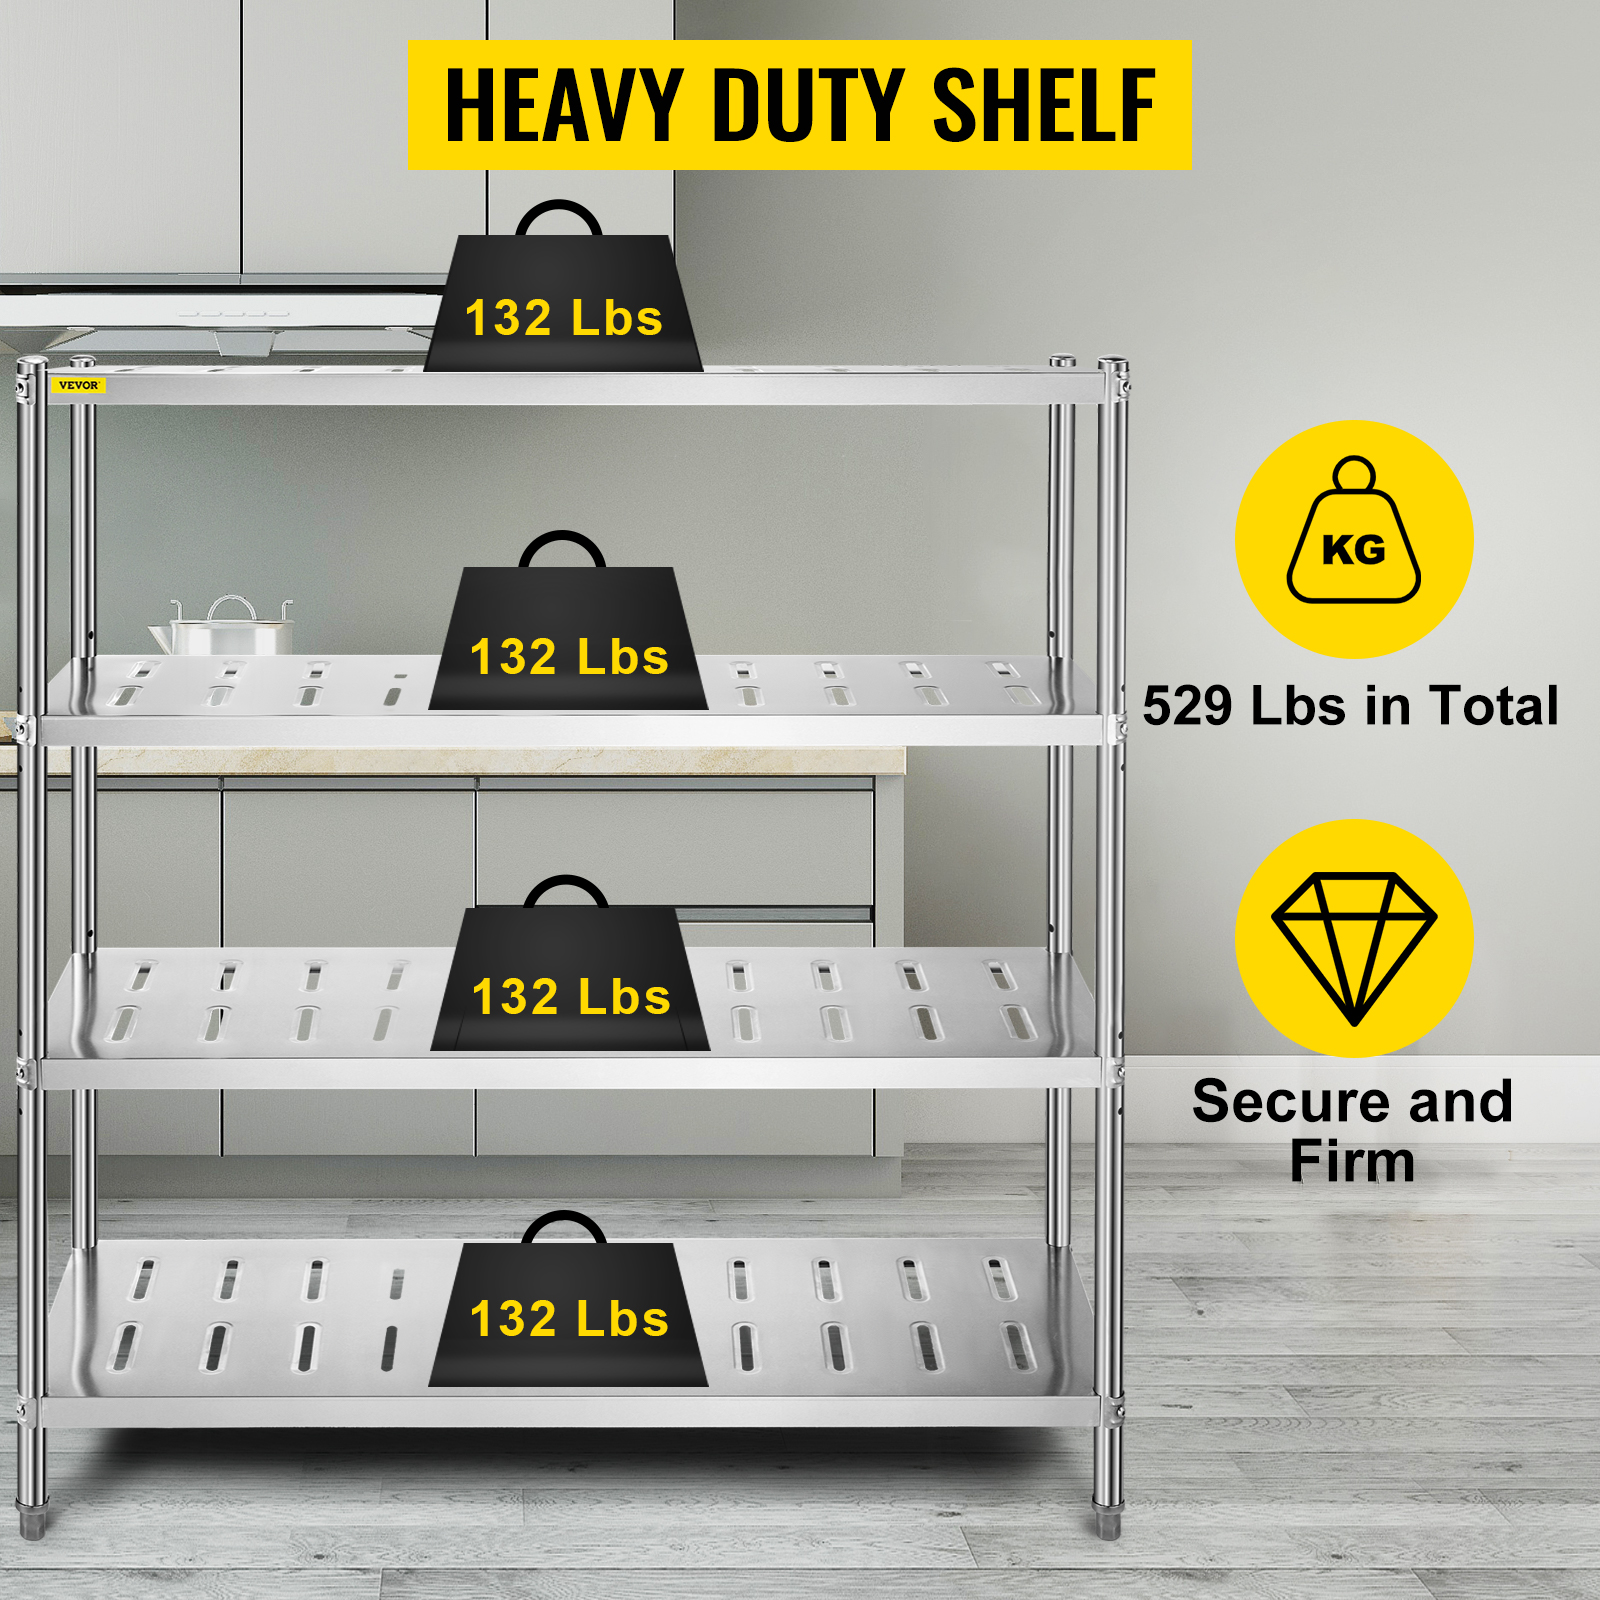 VEVOR Storage Shelf, 4-Tier Storage Shelving Unit, Stainless Steel Garage  Shelf, 59.1 x 17.7 x 61 inch Heavy Duty Storage Shelving, 529 Lbs Total  Capacity with Adjustable Height and Vent Holes